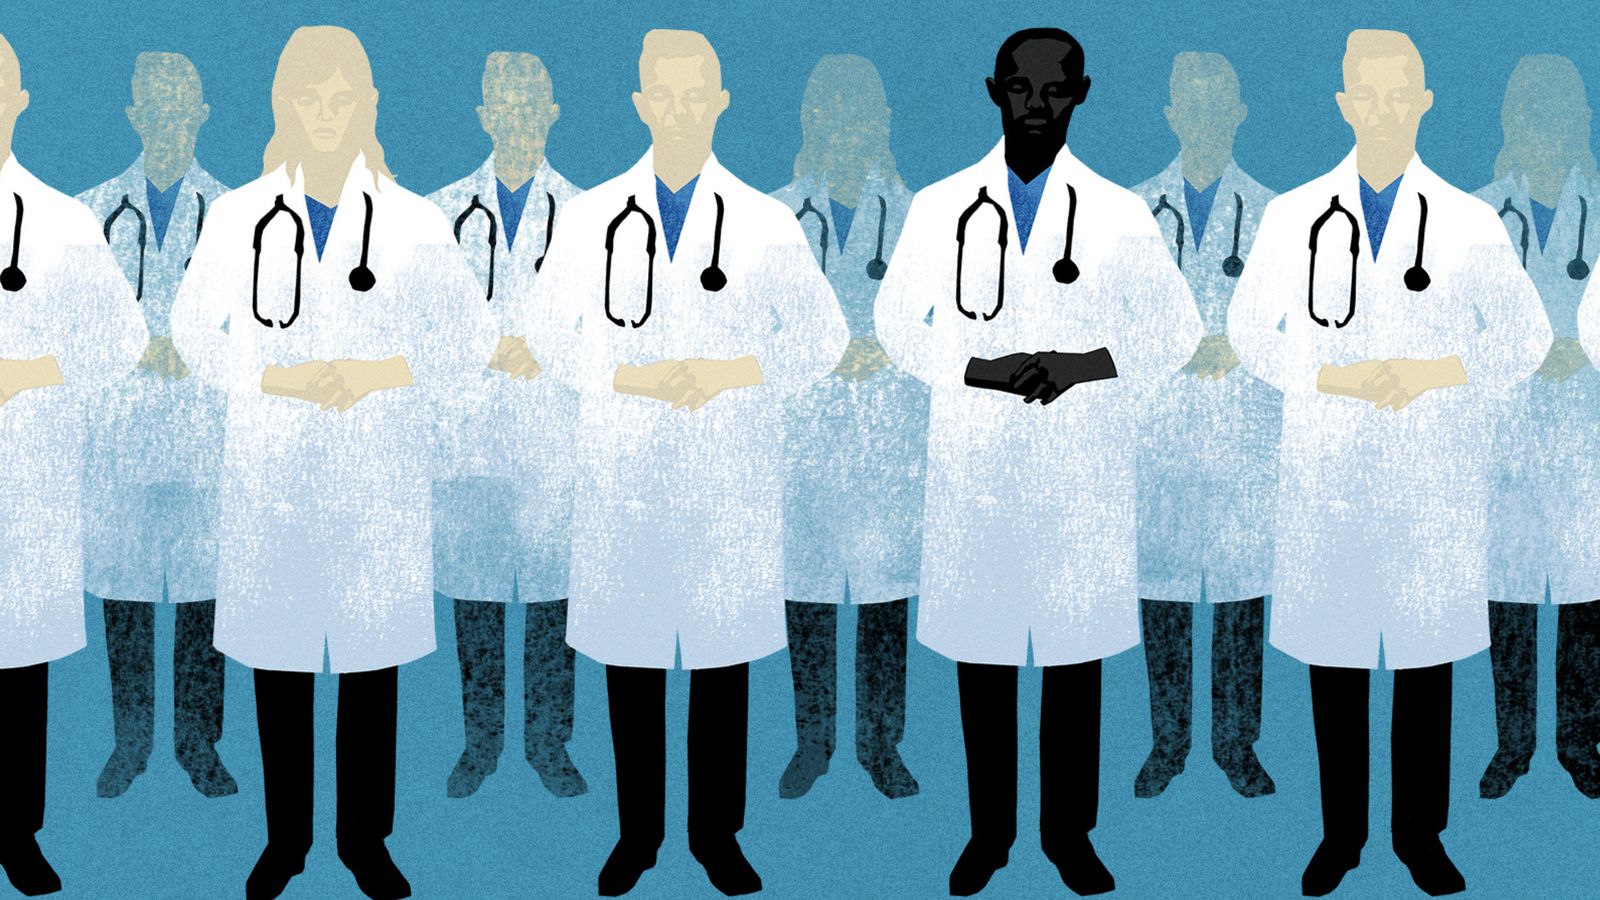 Only 5.7% of US doctors are Black, and experts warn the shortage harms public health | CNN